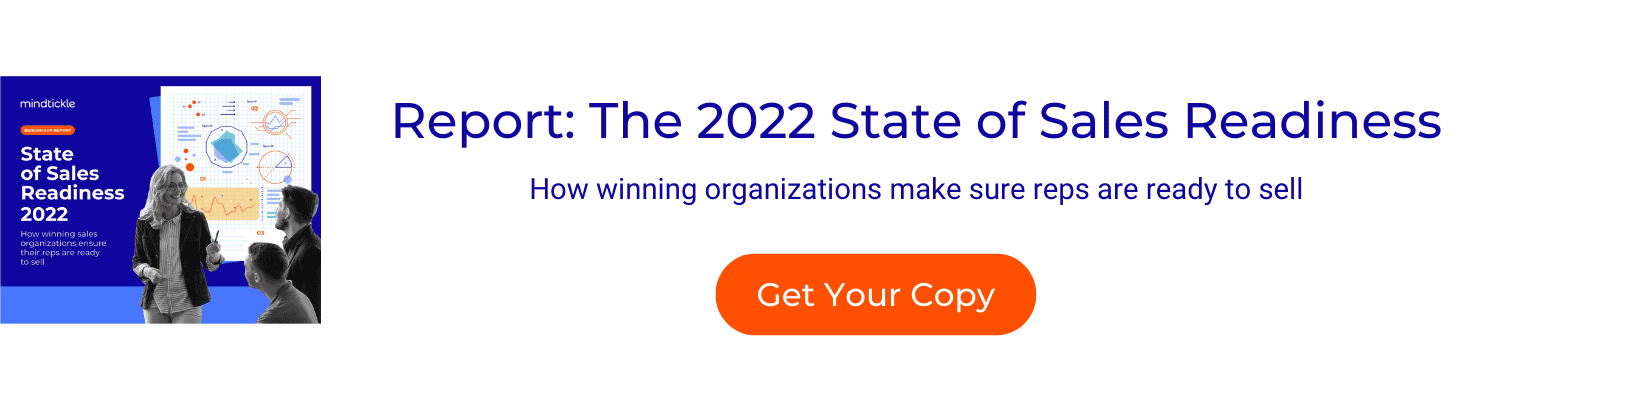 Mindtickle-2022-State-of-Sales-Readiness